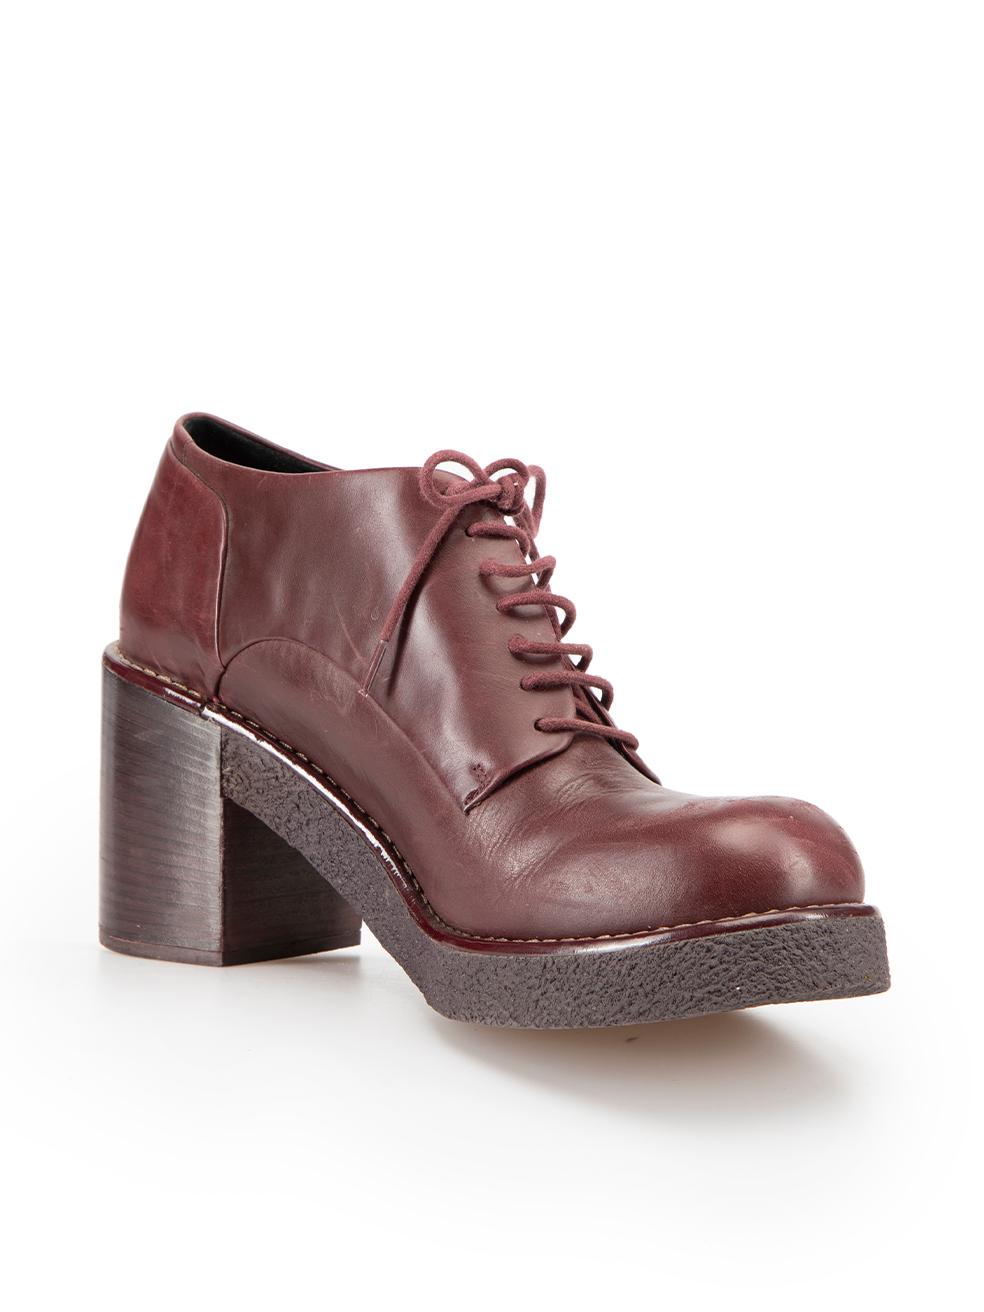 CONDITION is Good. Minor wear to shoes is evident. Light wear to both sides of both shoes and heels with scratches and scuffs on this used Jil Sander Navy designer resale item.



Details


Burgundy

Leather

Heeled oxfords

Mid block heel

Round